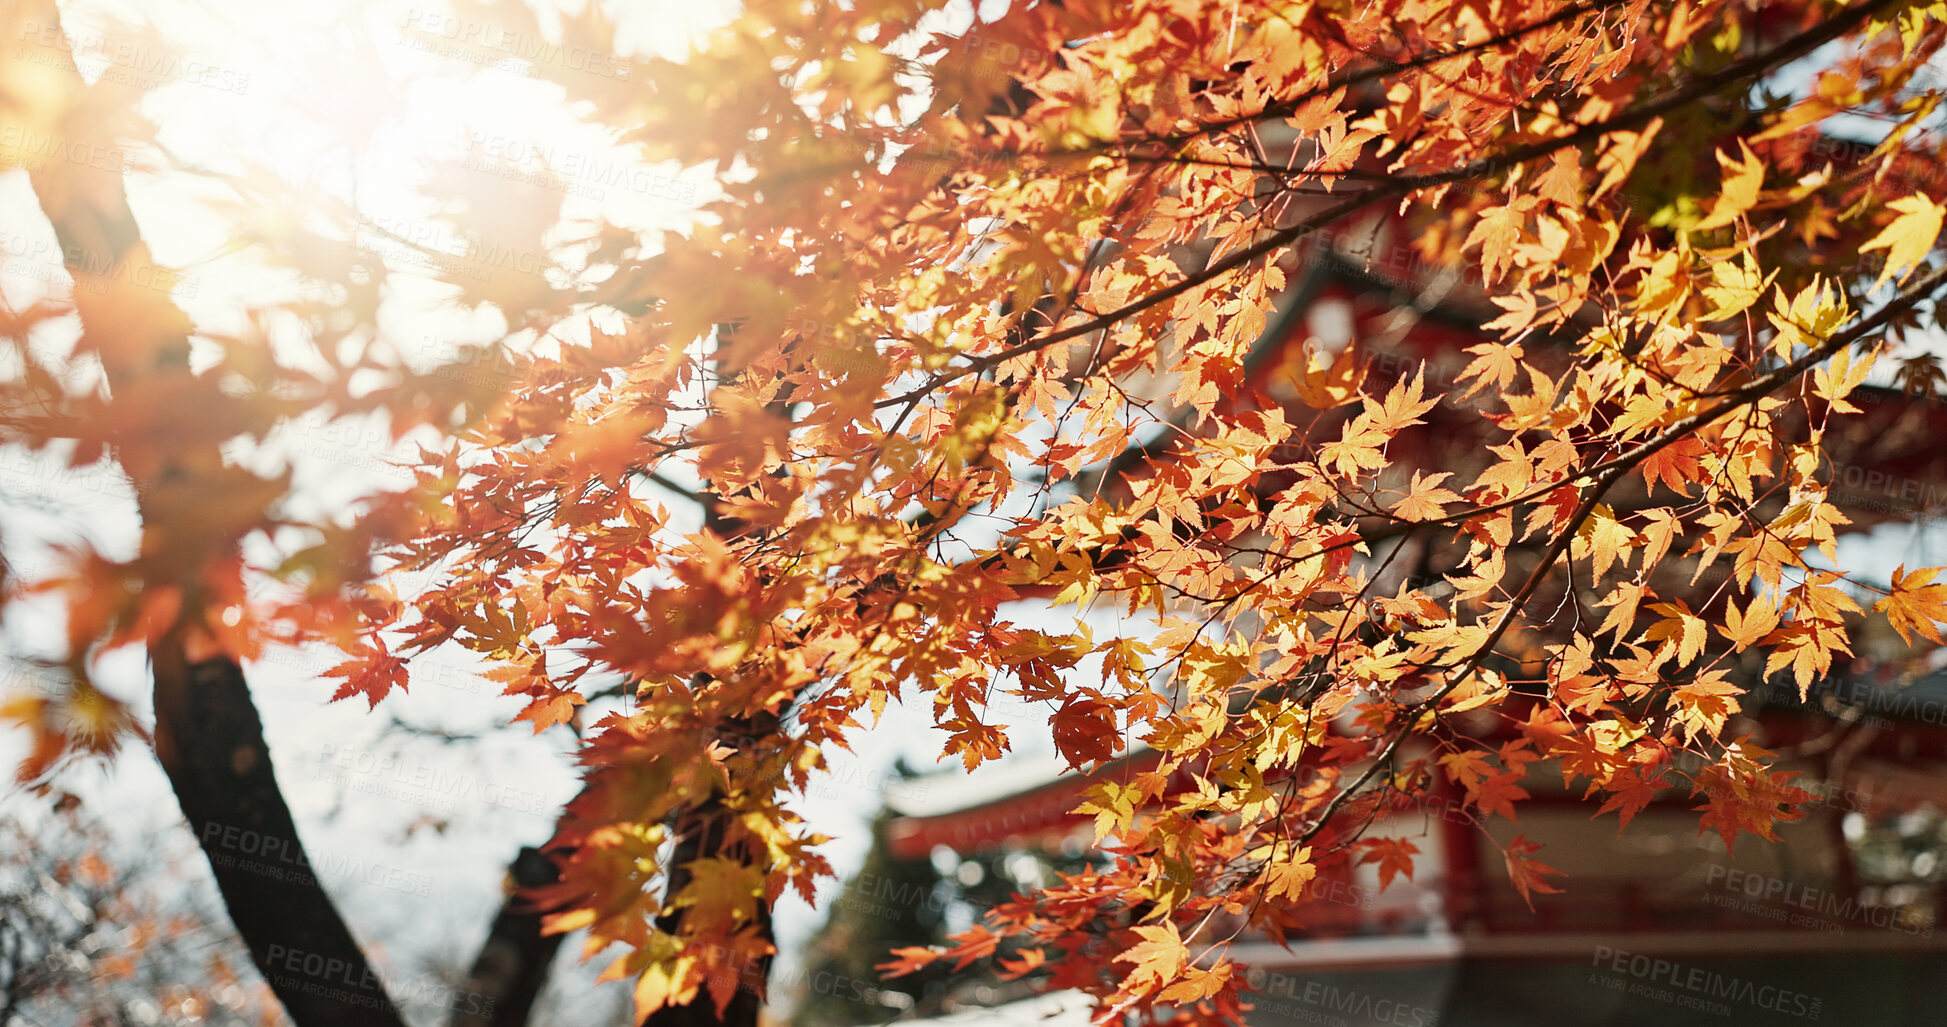 Buy stock photo Sun, leaves and tree with Japanese temple, environment and landscape, architecture with travel and lens flare. Sunshine, nature and autumn with orange foliage, traditional and pagoda building outdoor